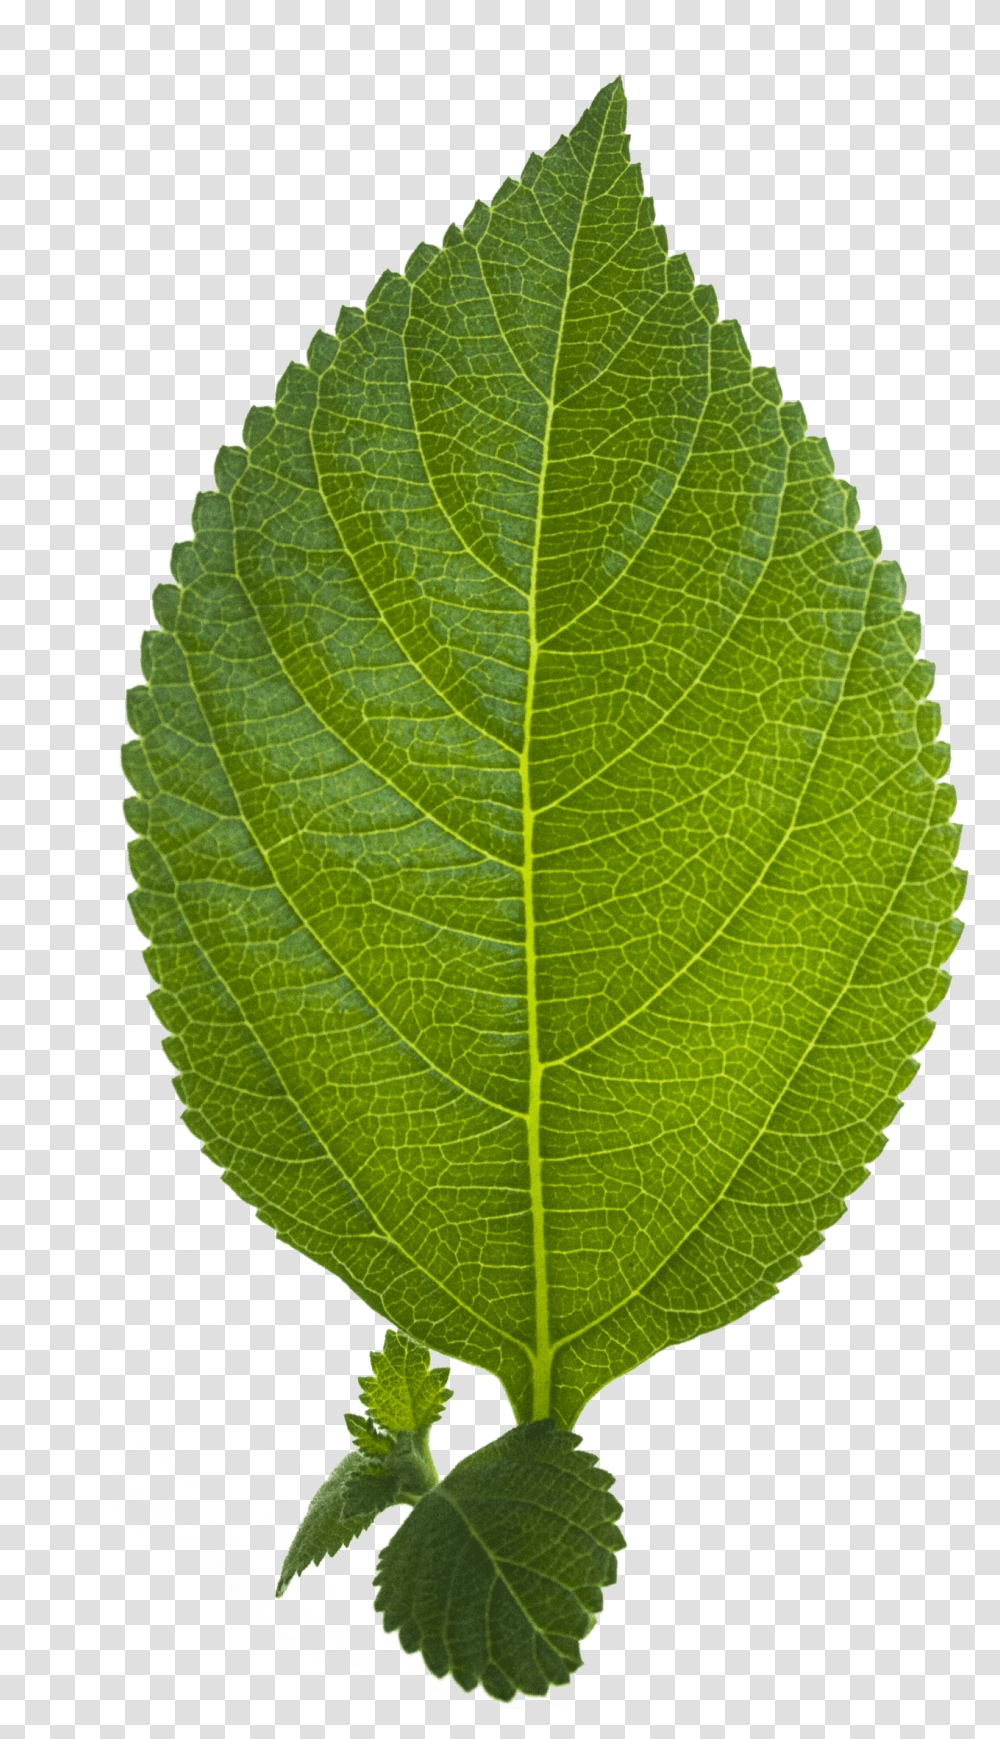 Leaf Hd Continental X King Racesport Black Chili Silver, Plant, Veins, Pineapple, Fruit Transparent Png